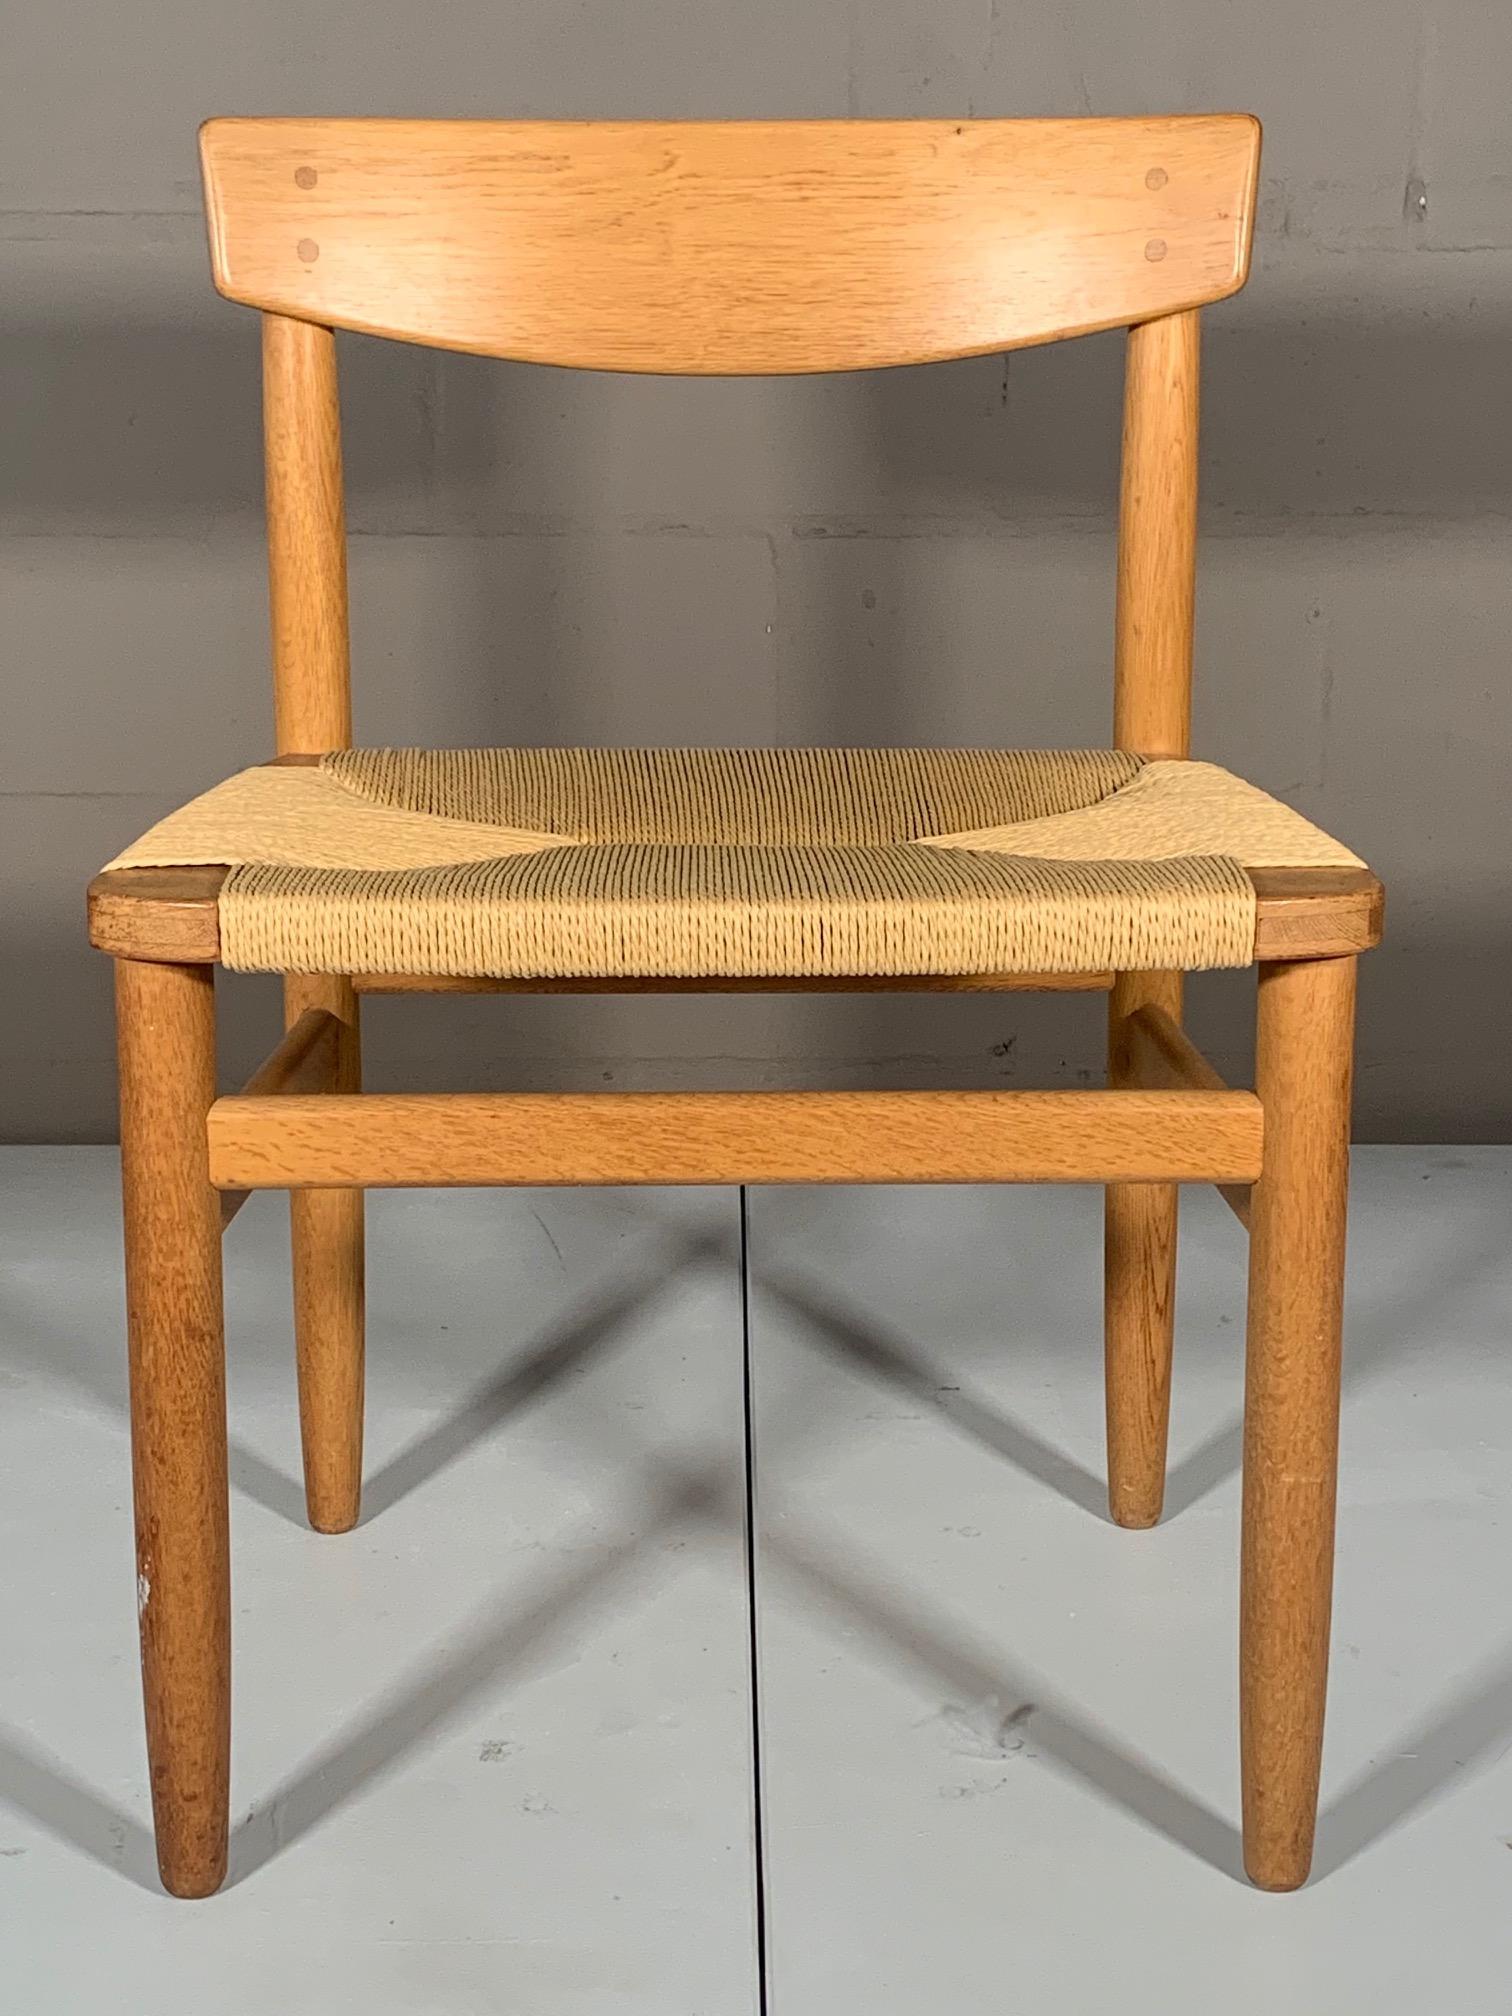 A classic oak and natural rush (papercord) dining or desk chair by Børge Mogensen. Newly redone seat, oak has a nice vintage patina. The chair is comfortable and is wider than most chairs of this style.